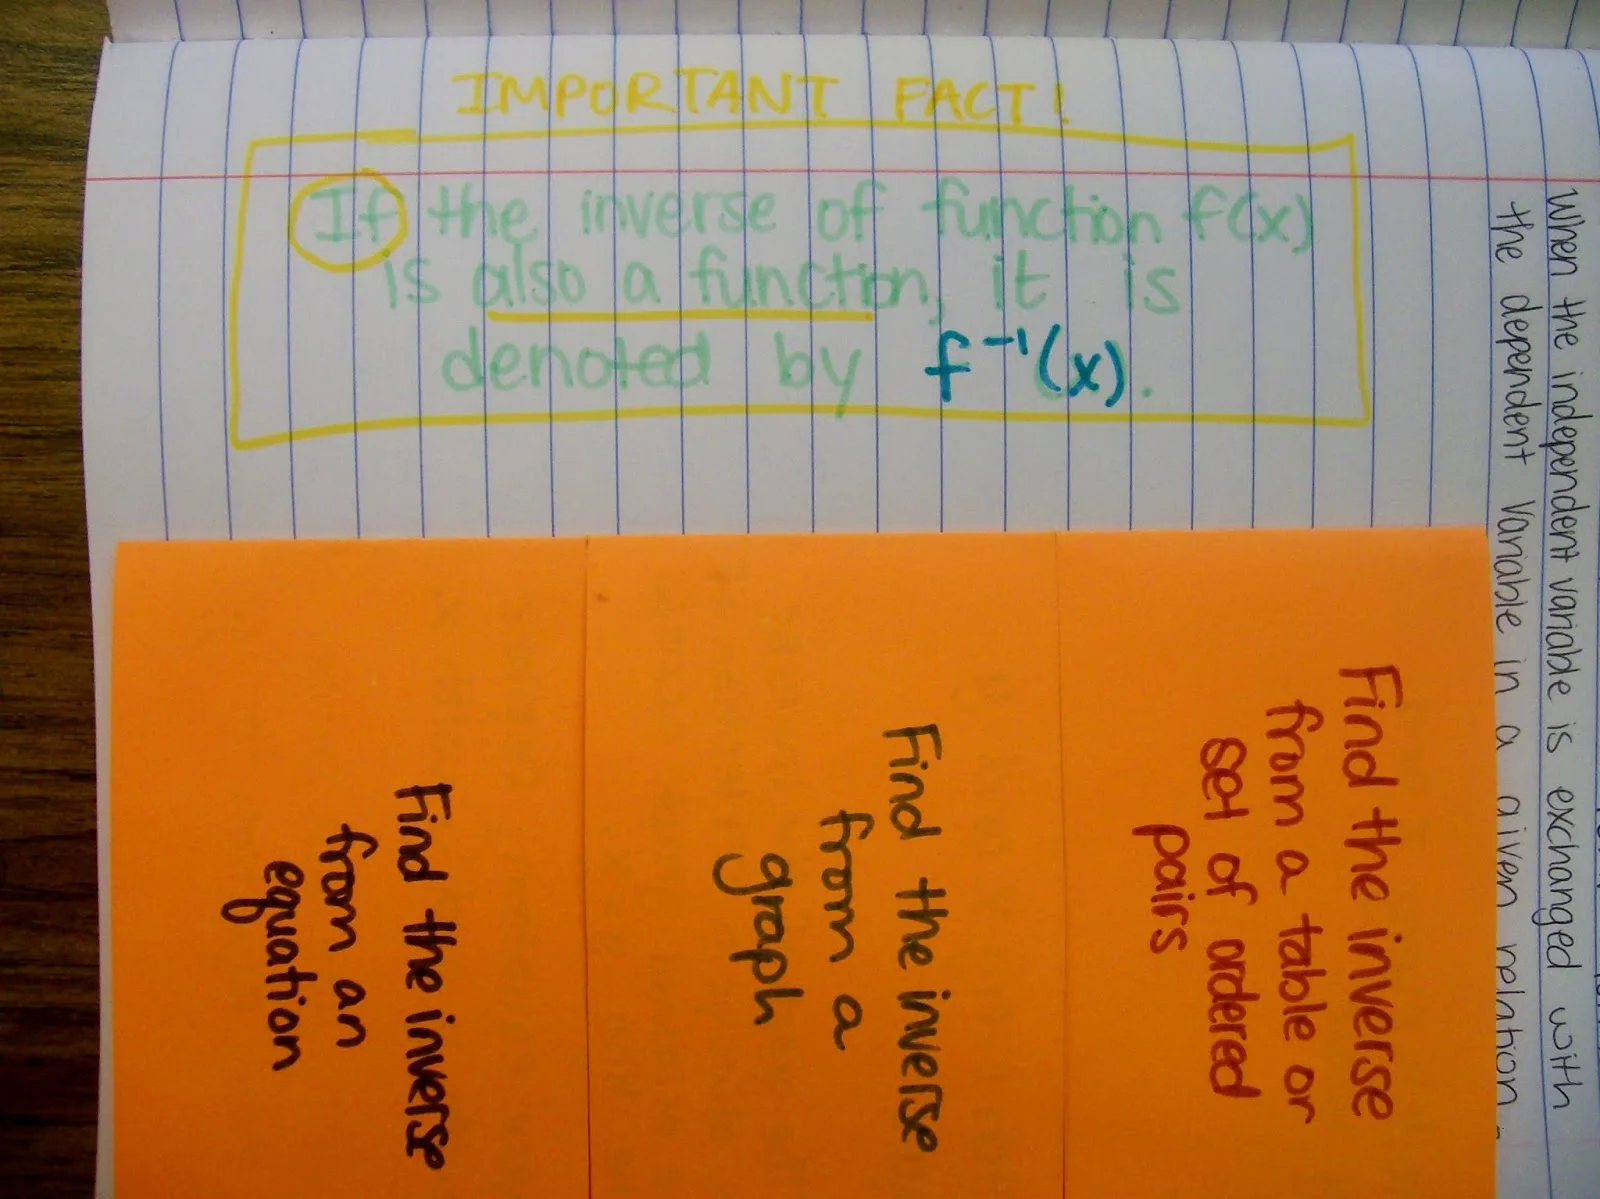 Finding the Inverse of a Function Foldable interactive notebook algebra math inbs